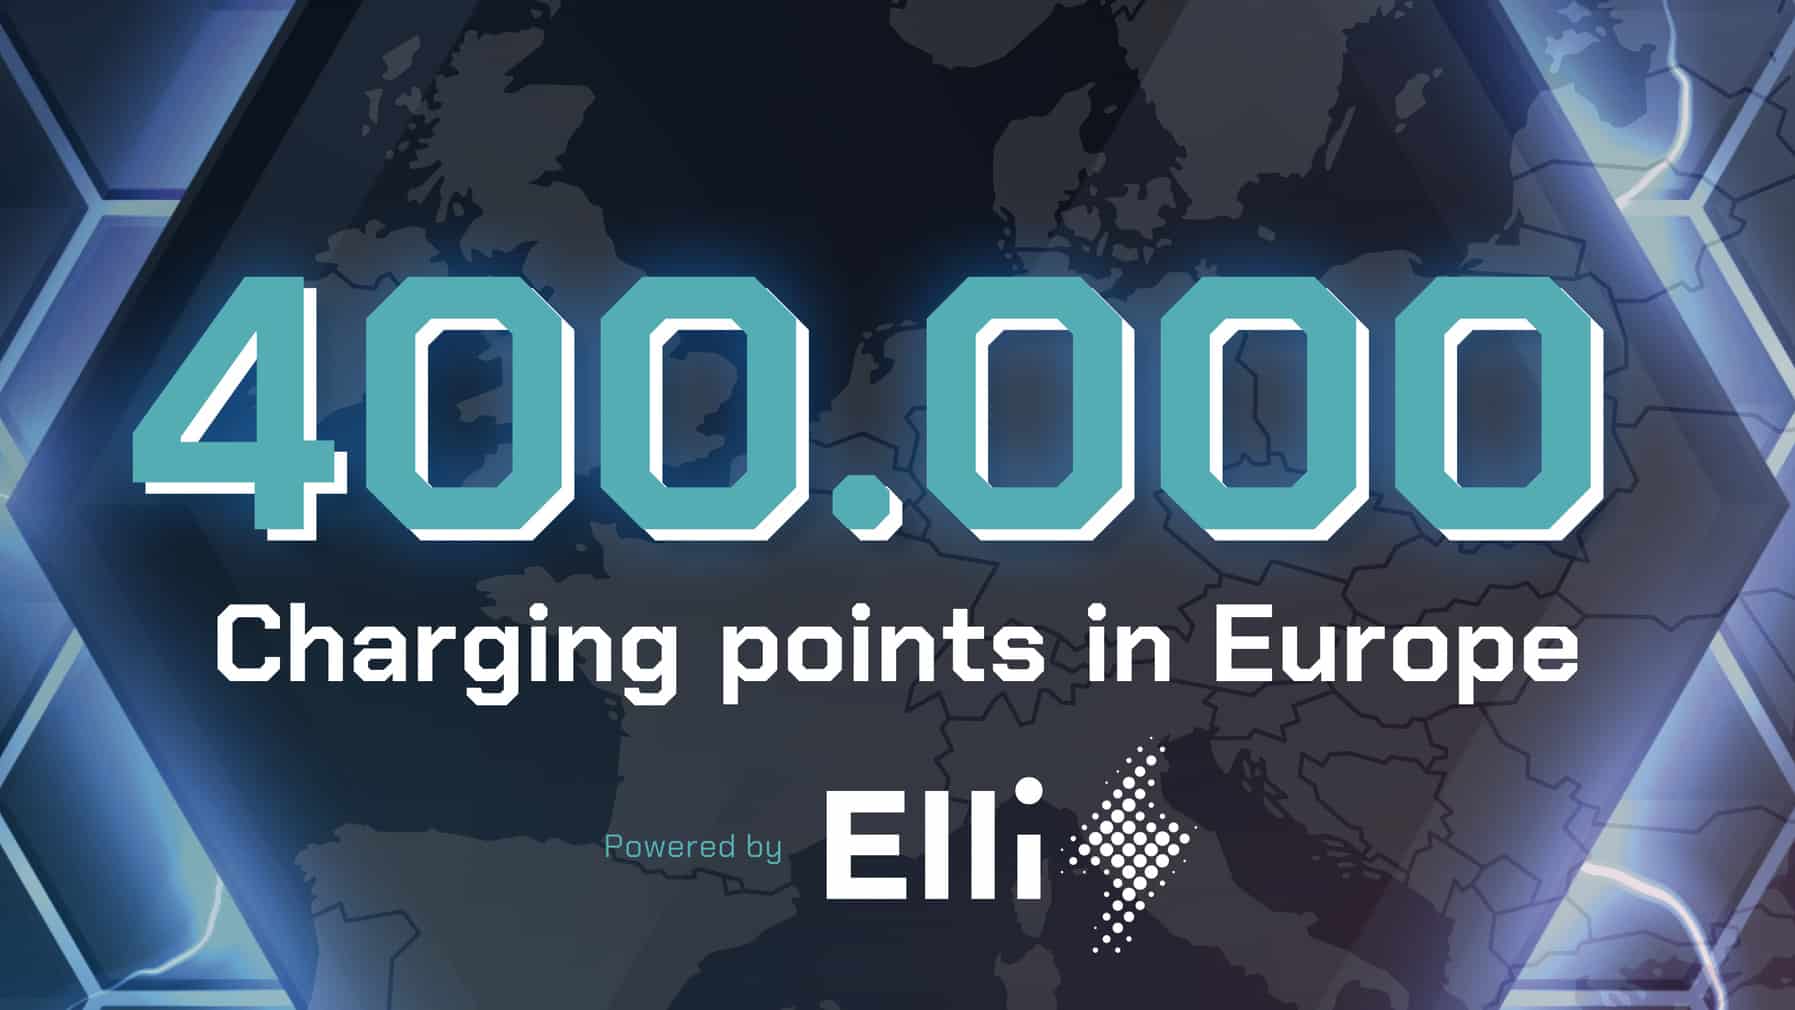 Volkswagen AG creates the greatest charging network in Europe with Elli